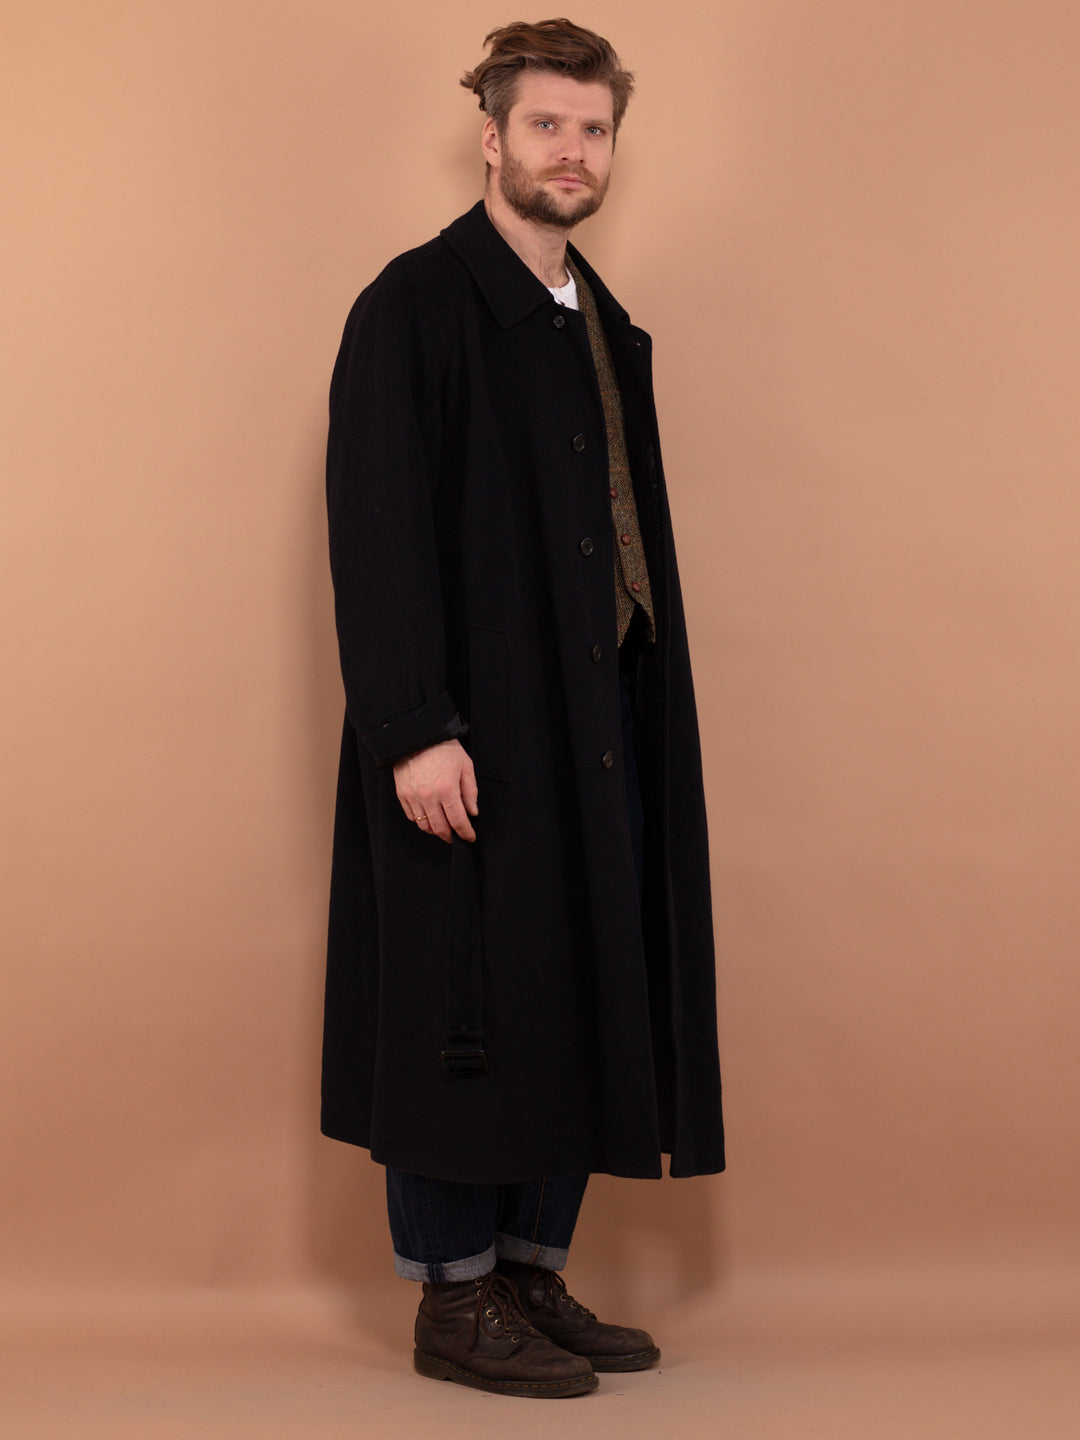 Wool and Cashmere Overcoat 80's, Size XXL, Vintage Greatcoat, Navy Blue Wool Blend Coat, Belted Maxi Coat, Long Oversized Coat, Outerwear